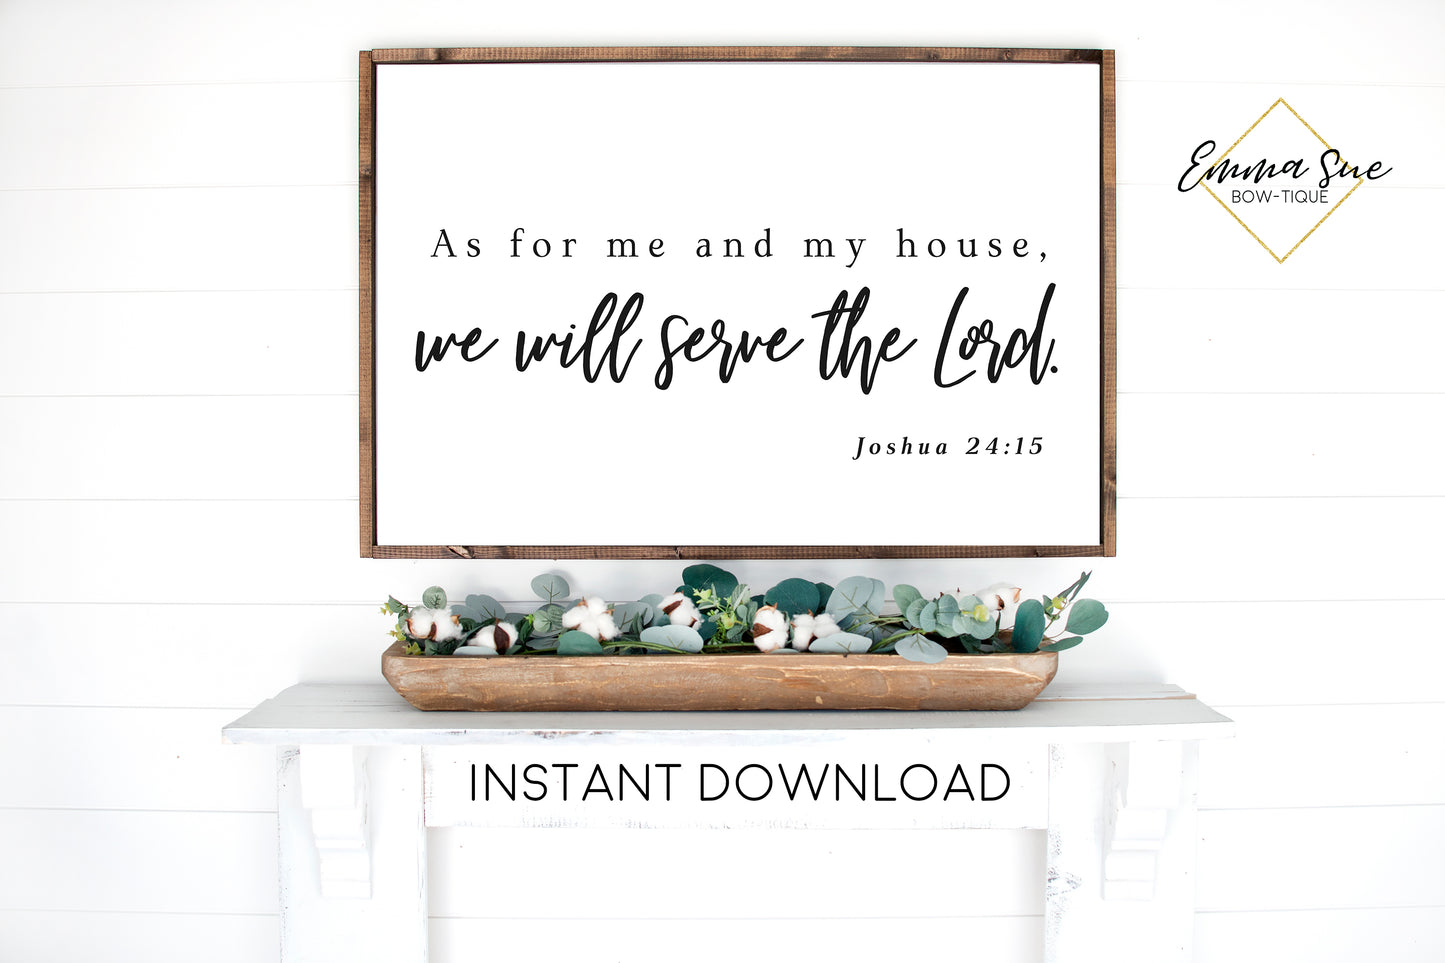 As for me and my house we will serve the Lord - Joshua 24:15 Bible Verse Farmhouse Christian Printable Sign Wall Art - Instant Download